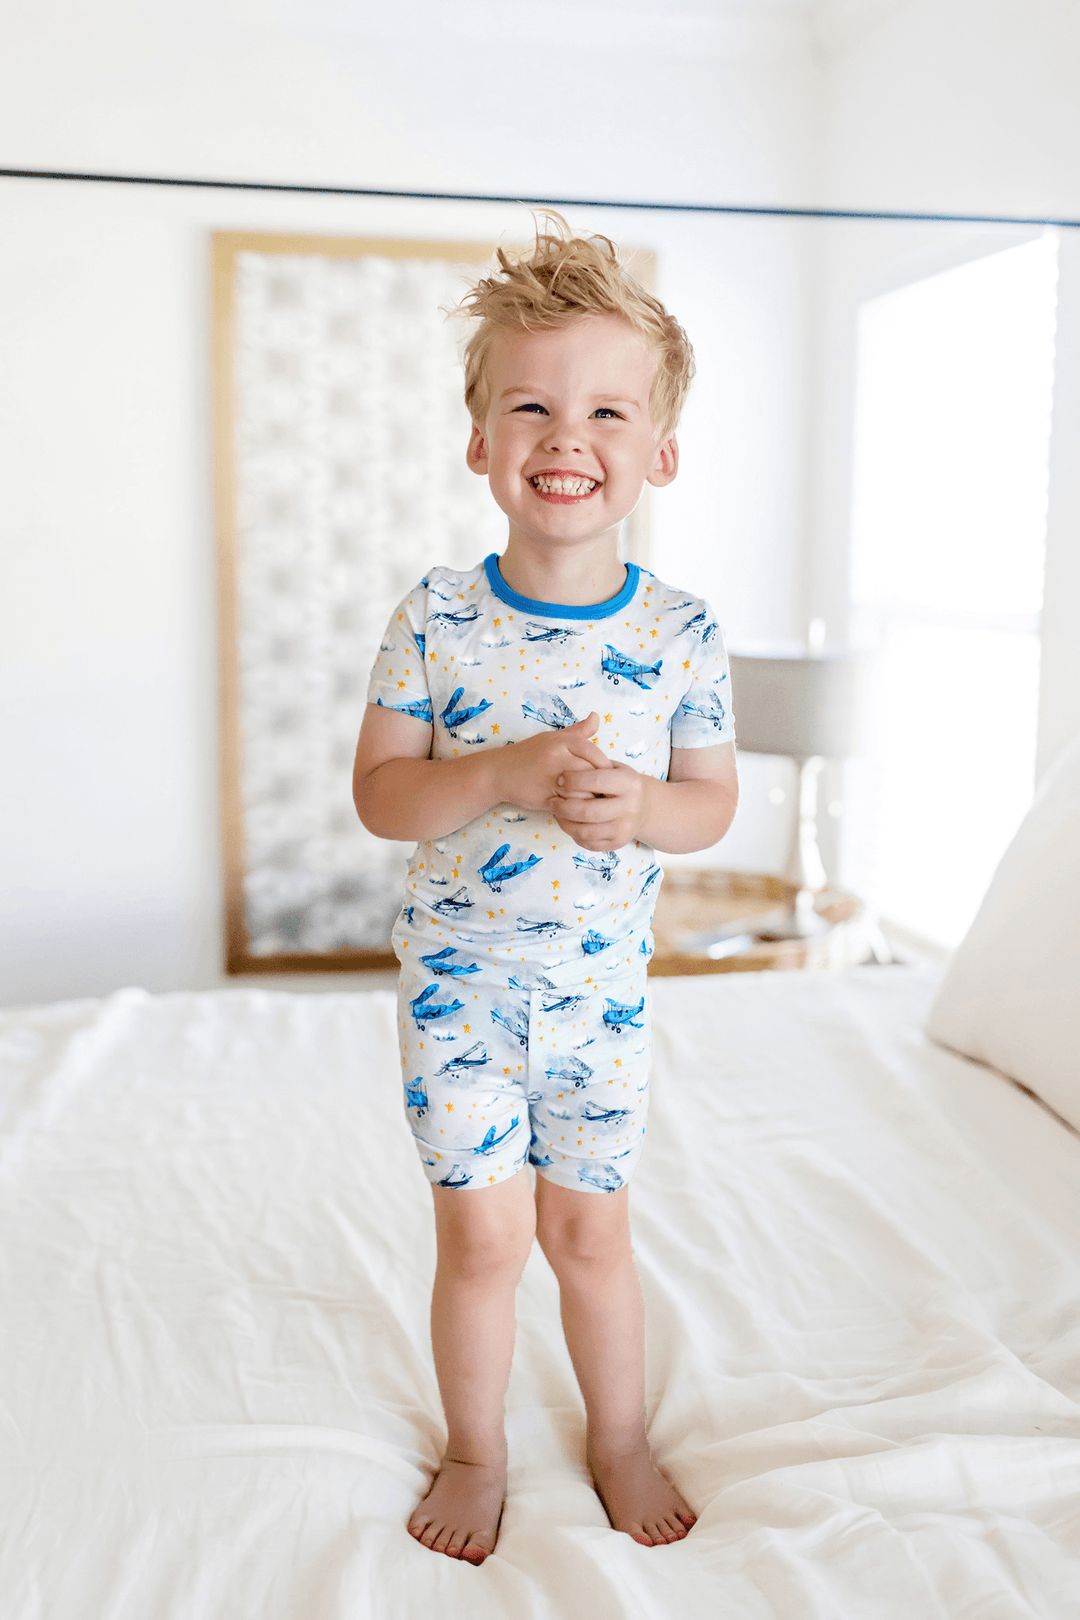 Planes Flying on Cloud 9 Short Sleeve and Shorts Pajama Set (2T-12Y)